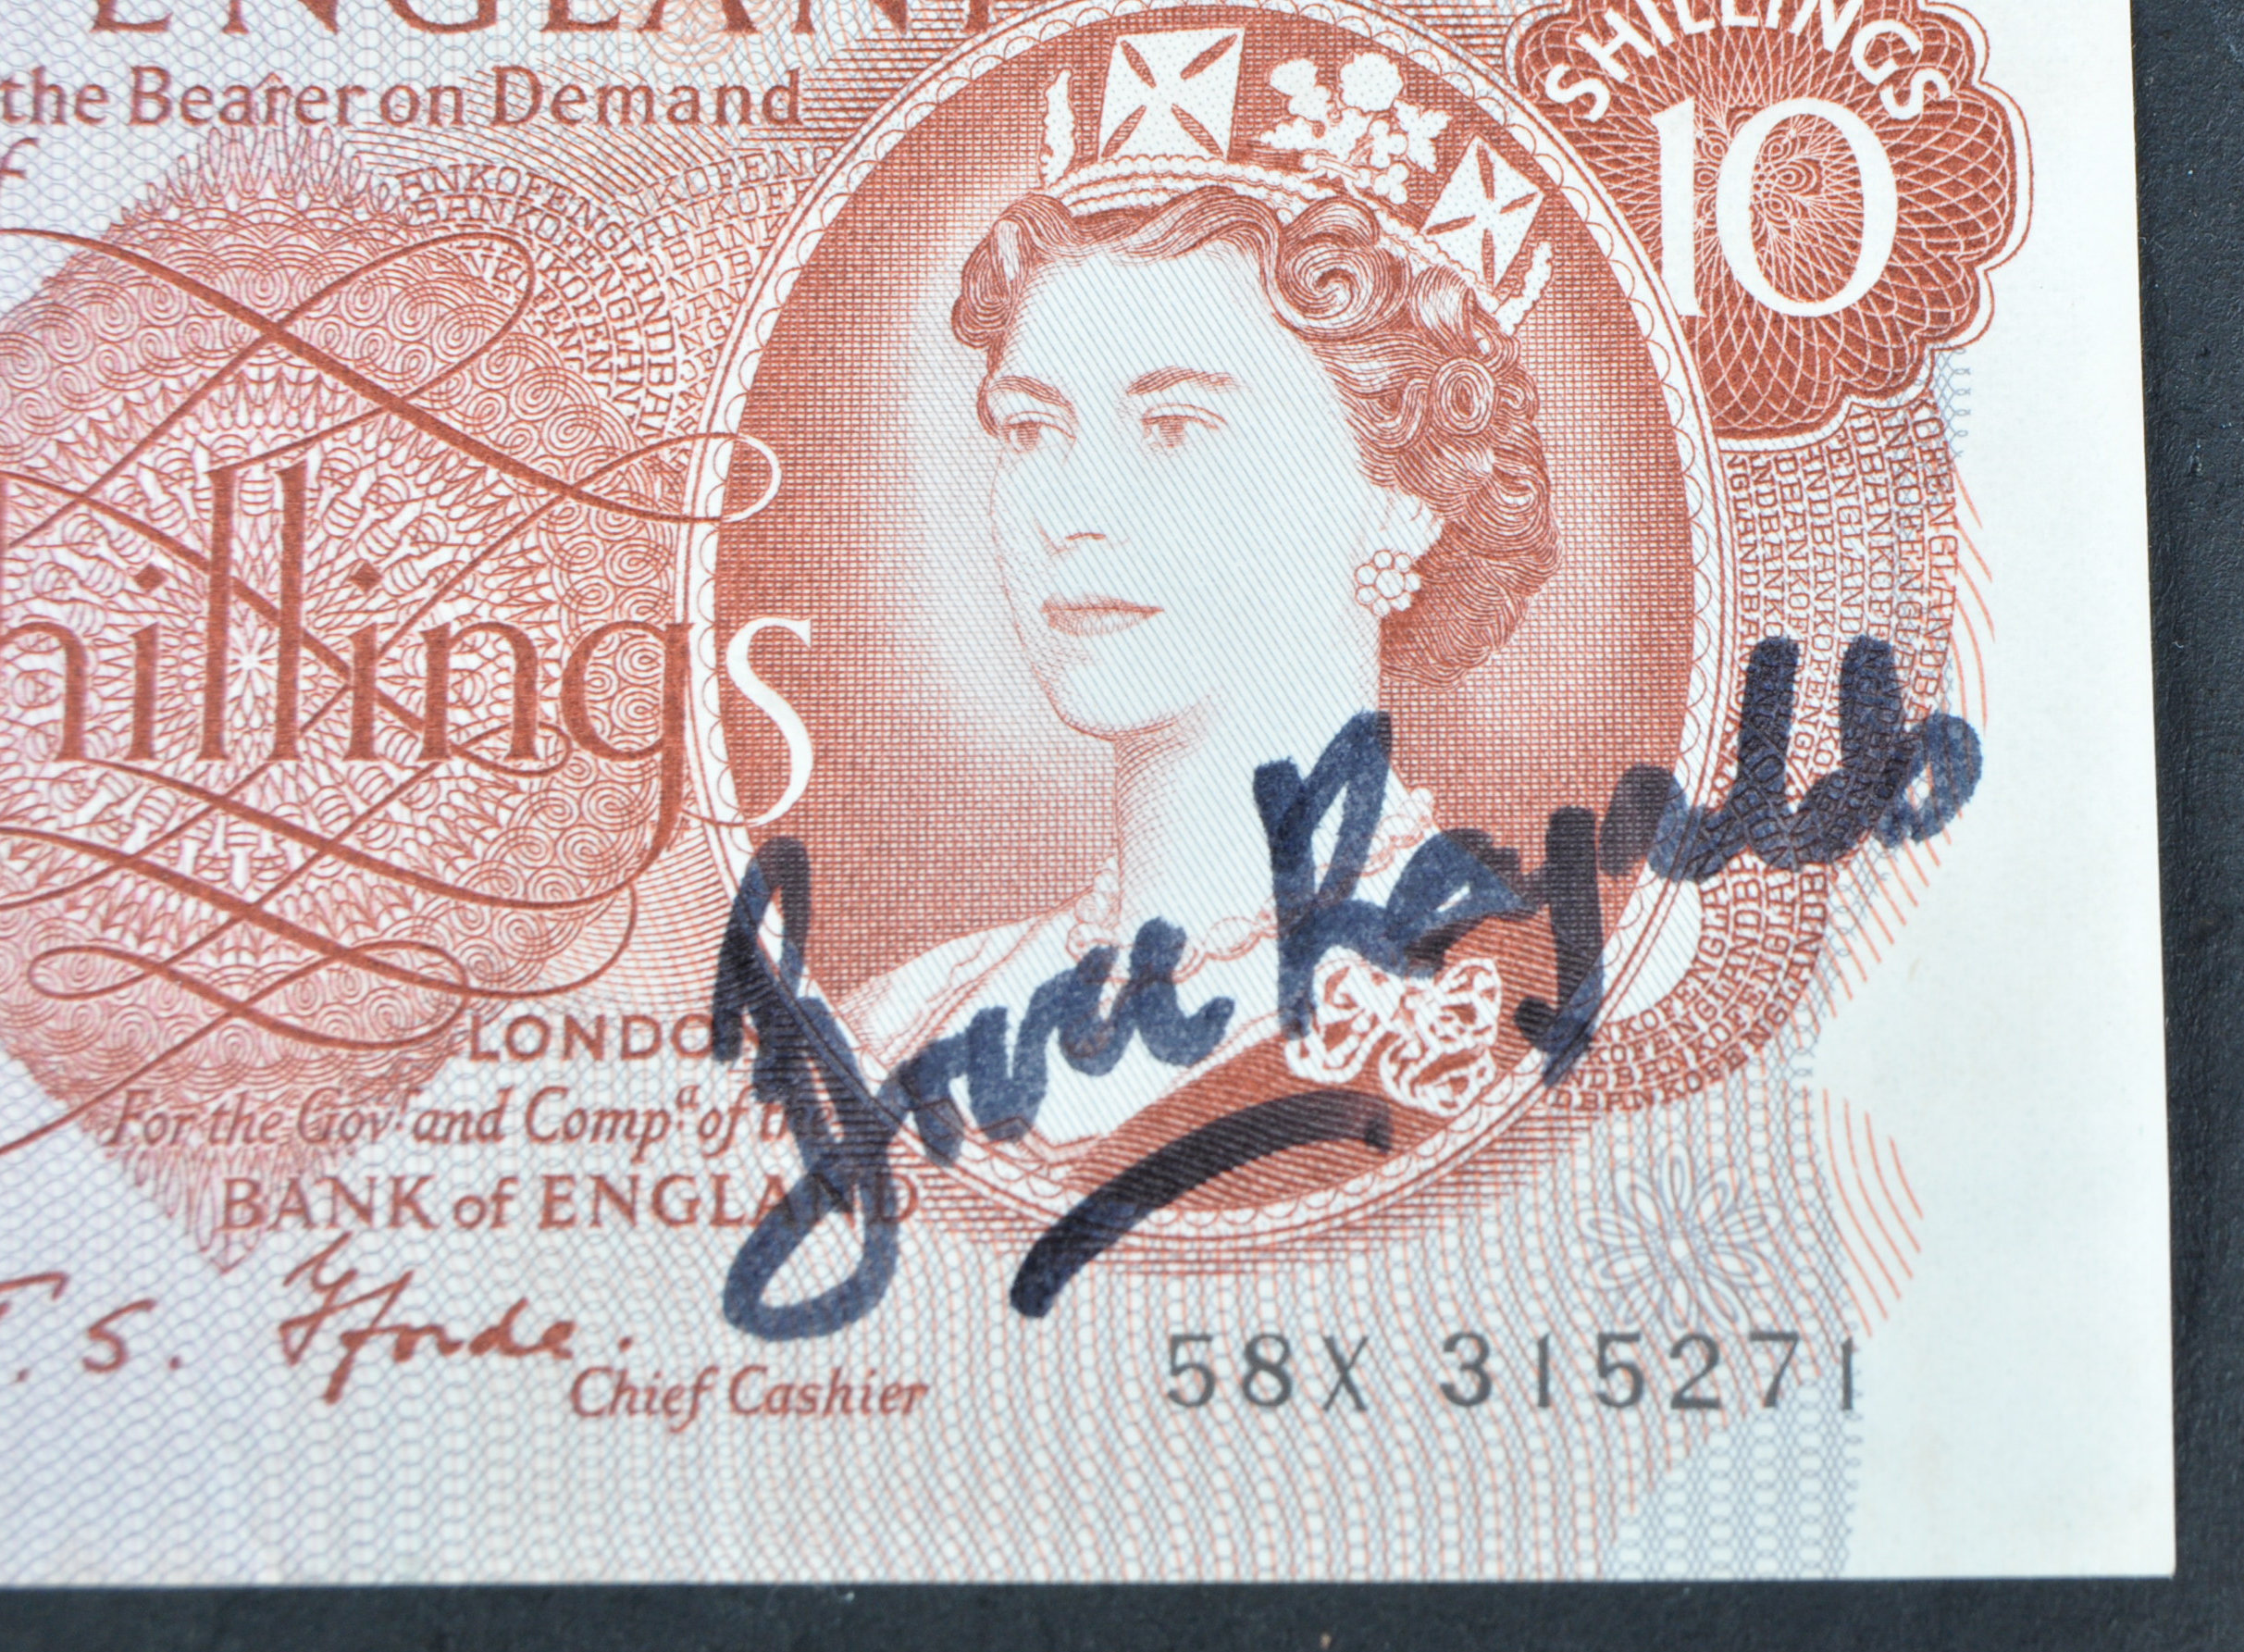 GREAT TRAIN ROBBERY - BRUCE REYNOLDS (1931-2013) - SIGNED BANK NOTE - Image 2 of 4